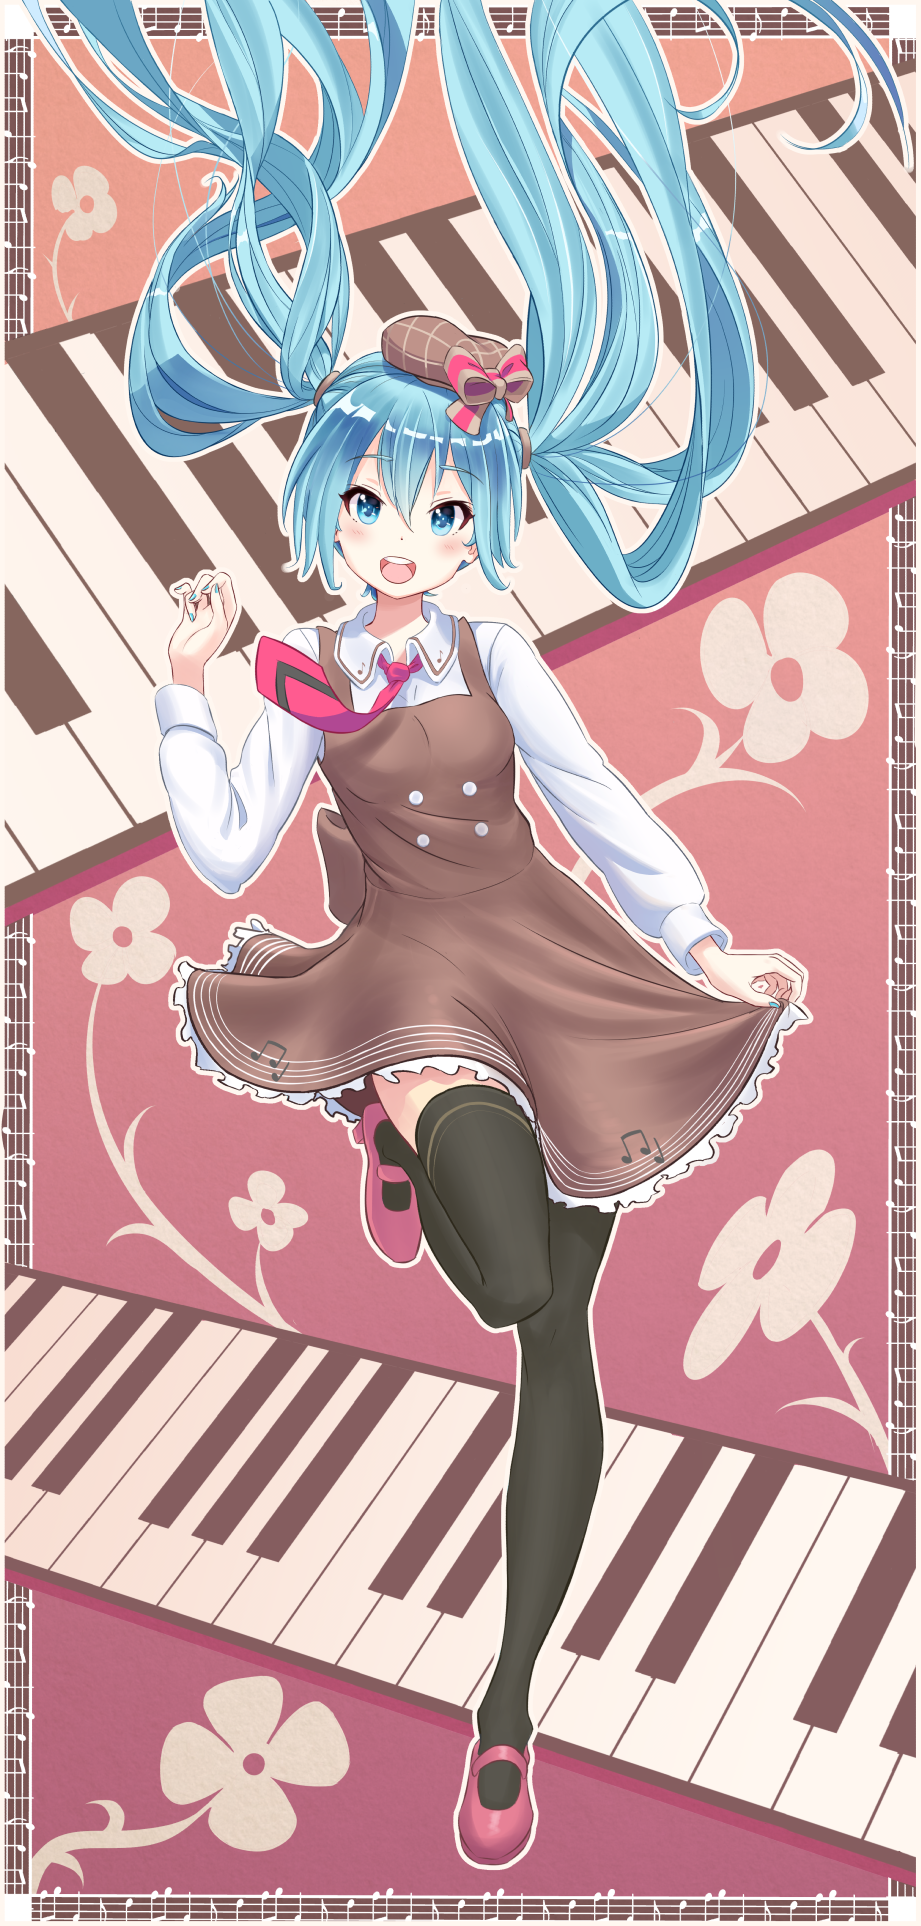 1girl aqua_eyes aqua_hair bibboss39 black_legwear blush bow brown_dress dress eyebrows_visible_through_hair floating_hair flower full_body hat hatsune_miku highres long_hair looking_at_viewer mary_janes musical_note nail_polish necktie open_mouth piano_keys pink_footwear shoes skirt_hold solo thigh-highs twintails very_long_hair vocaloid